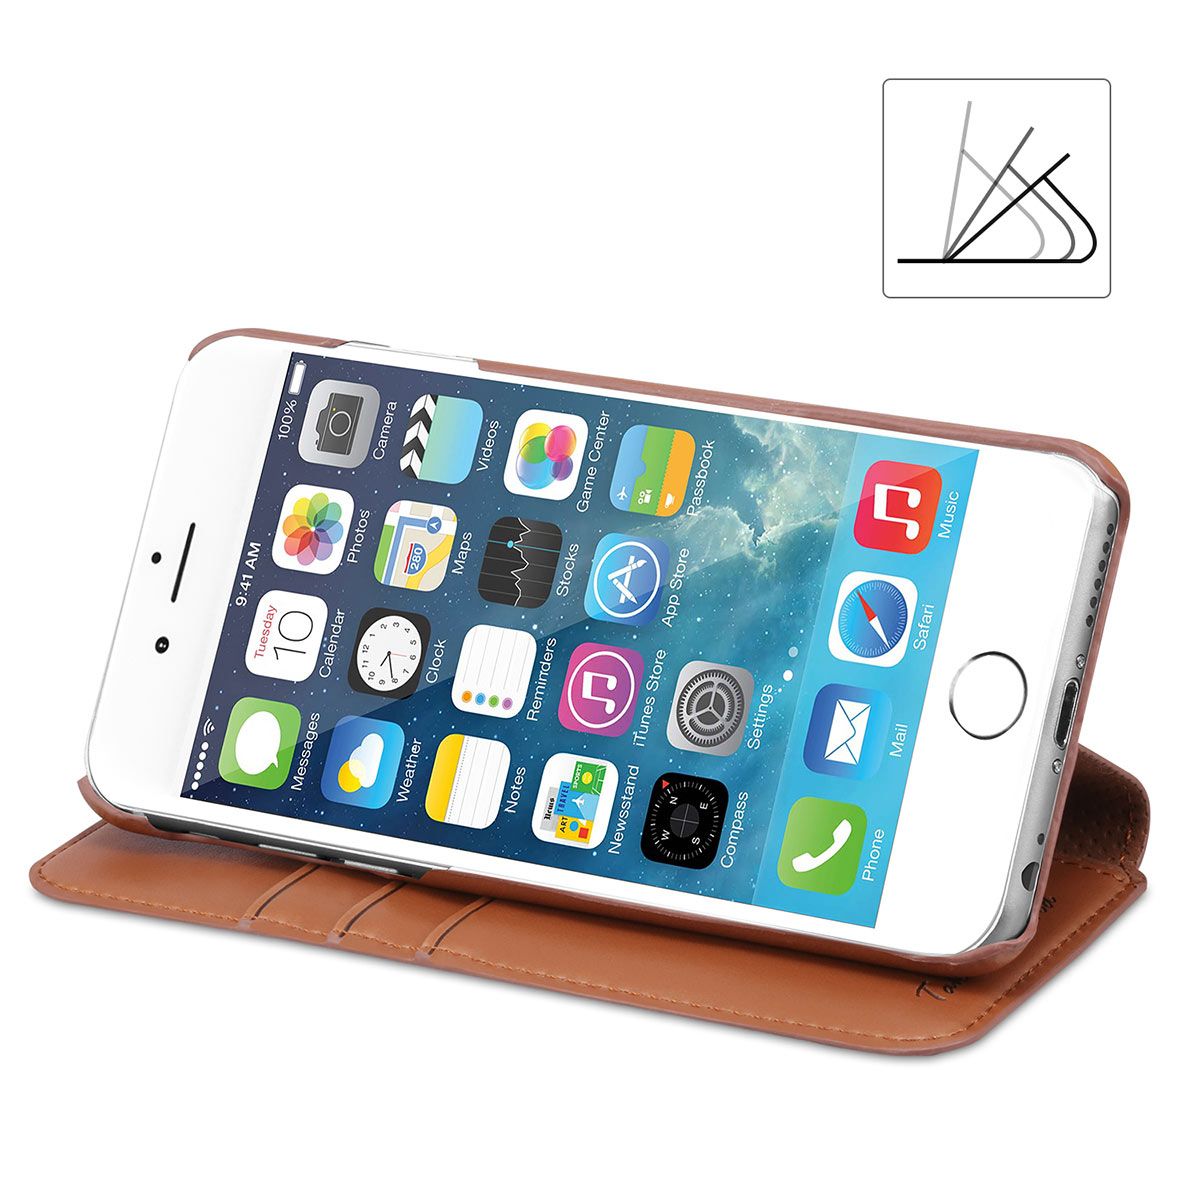 TUCCH iPhone 6S/6 Plus Leather Wallet Phone Case, Wrist Strap